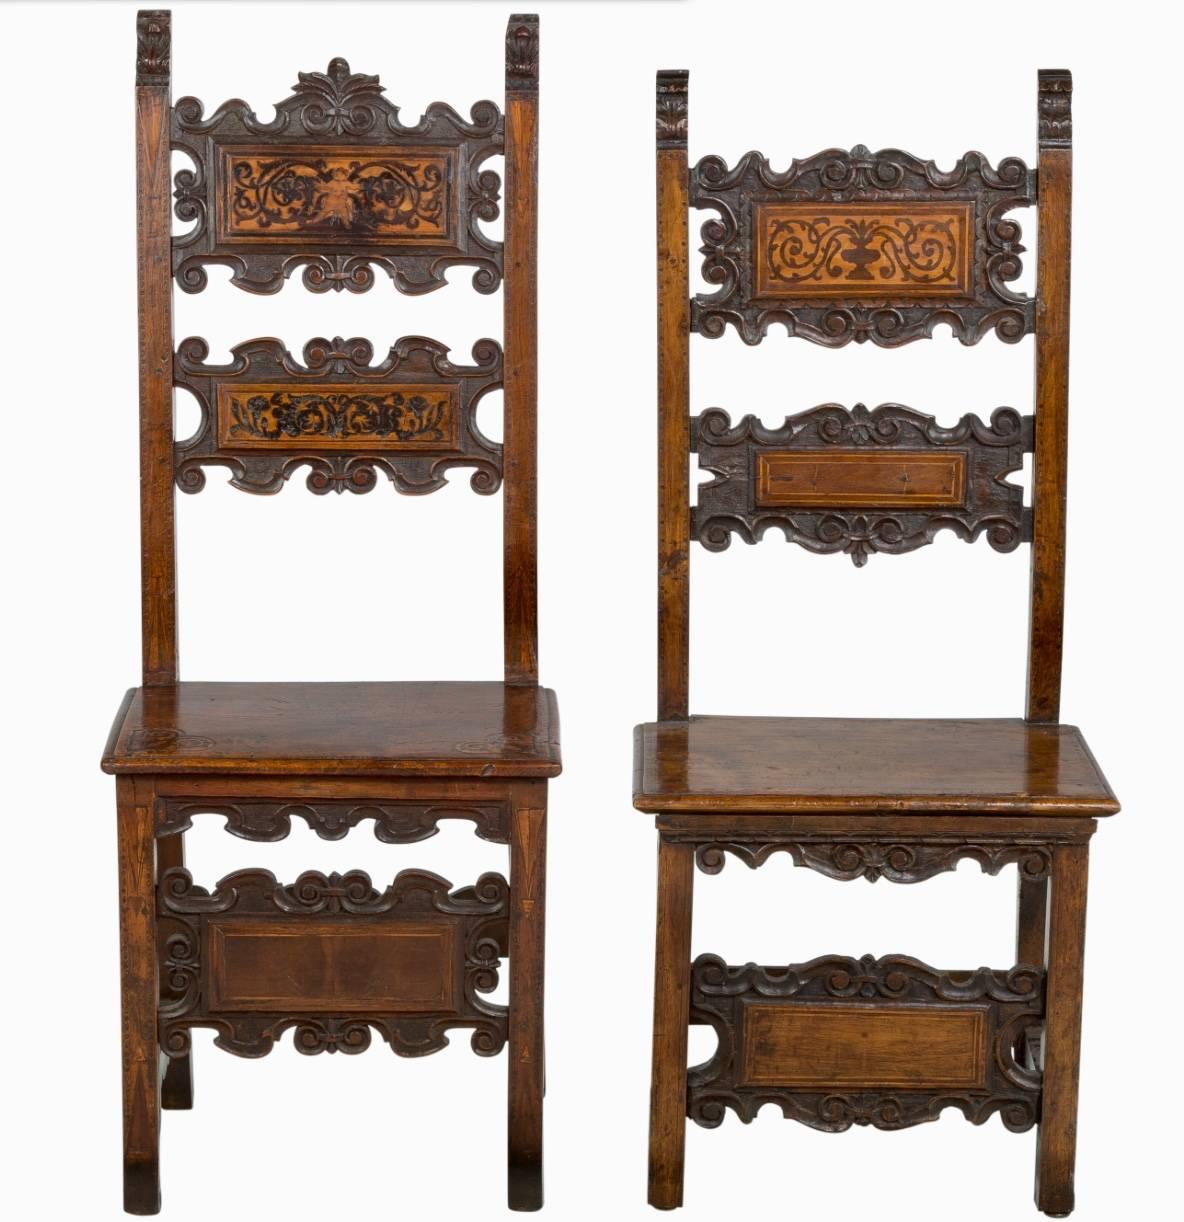 Pair of Lombardian maple and walnut post chairs, 17th century. Richly hand-carved and inlaid in maple and walnut perfect for accent or hall chairs. Design and dimensions are not identical.

Dimensions: 
Height 47.75 inches 
Width 20,25